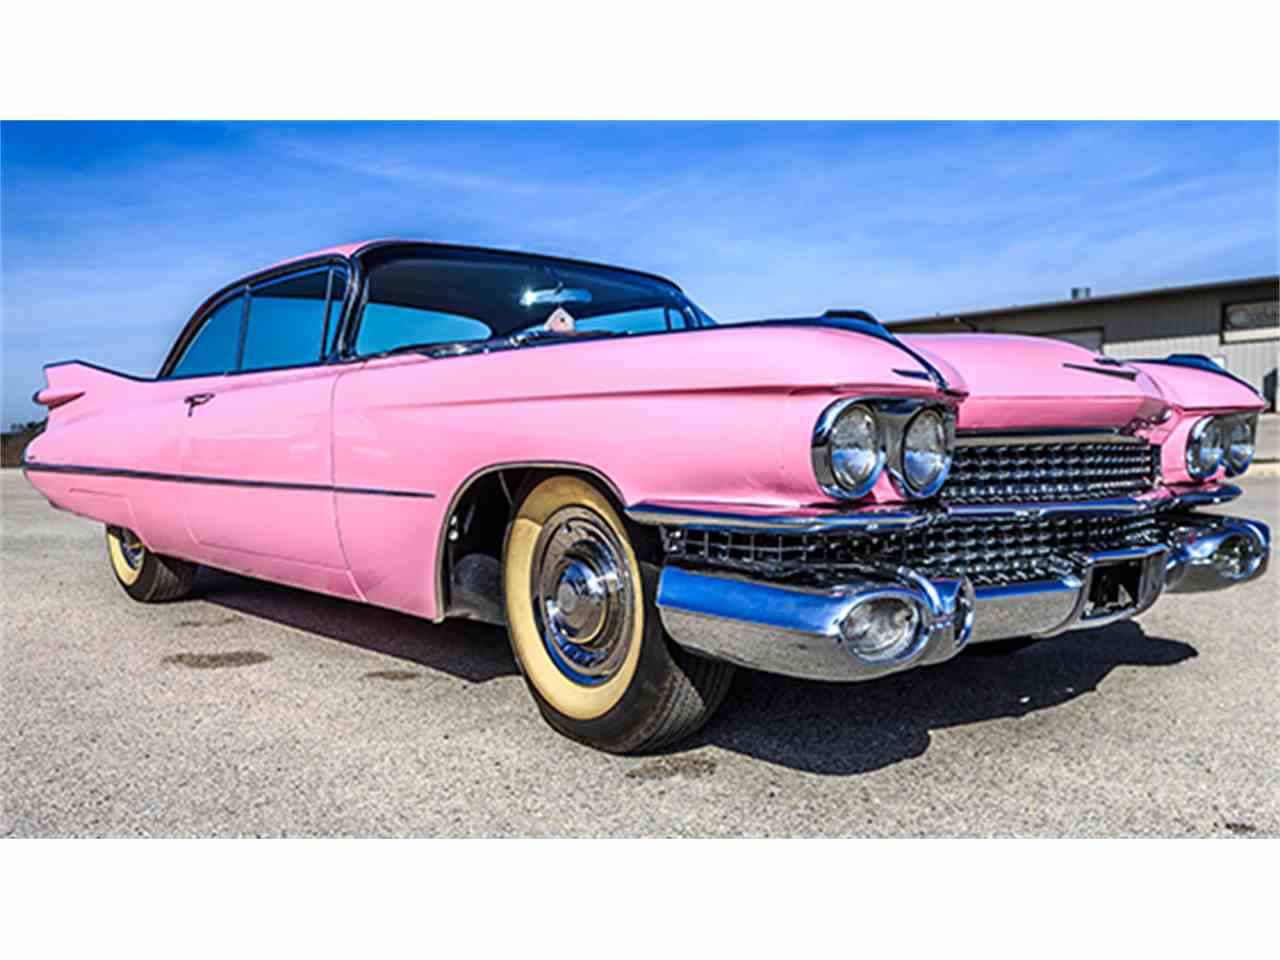 High Resolution Wallpaper | 1959 Cadillac Coupe Deville 1280x960 px